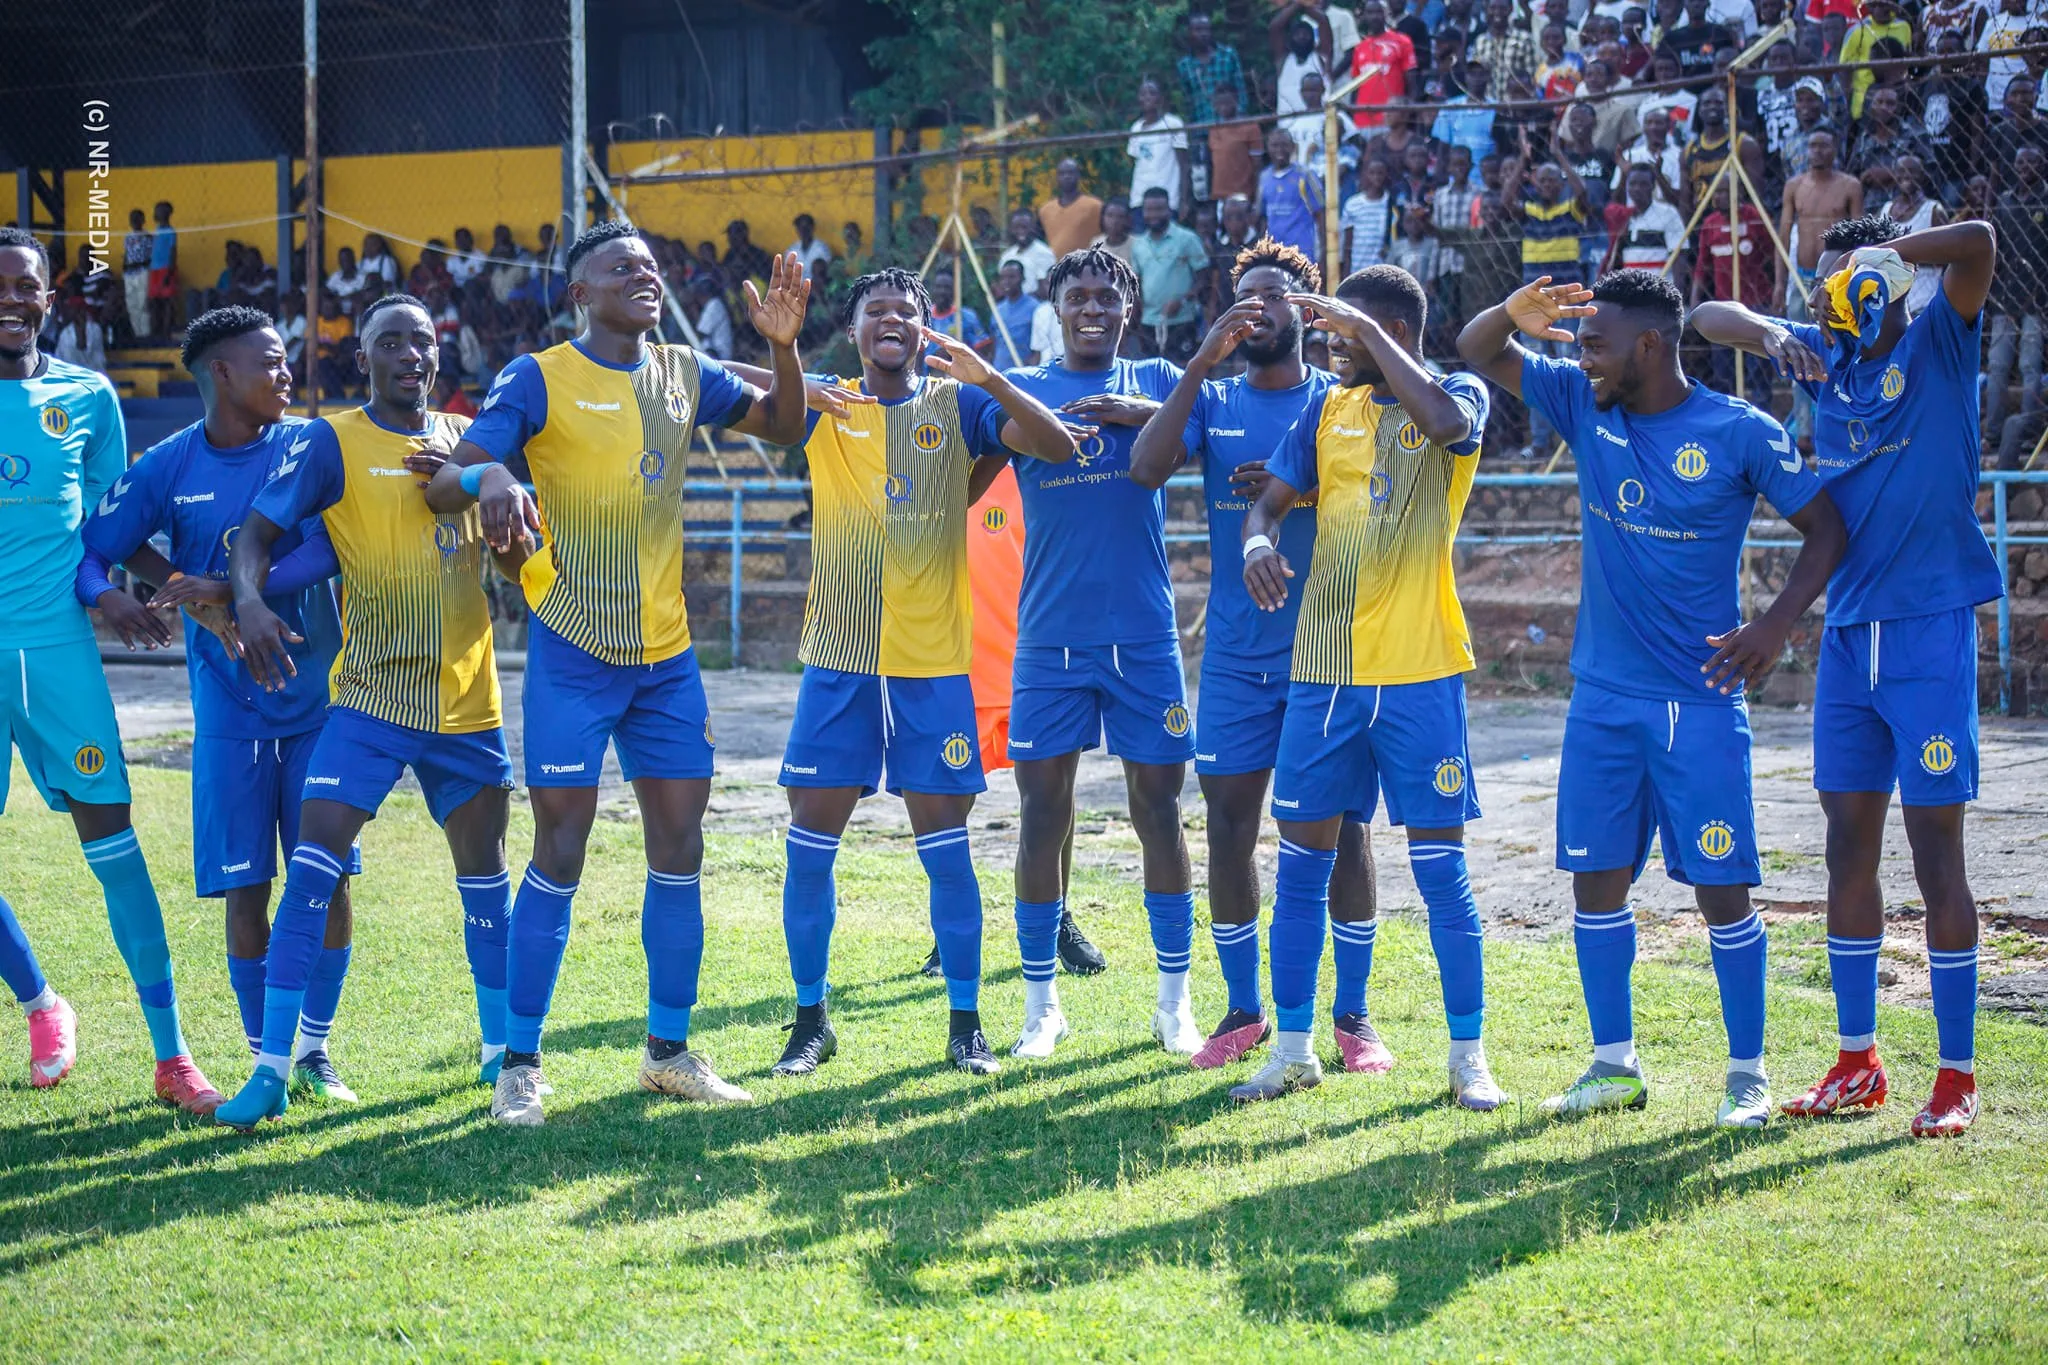 Nchanga Rangers Claim ABSA Cup Spot, Six Teams Vie for Second Place in Heated Battle